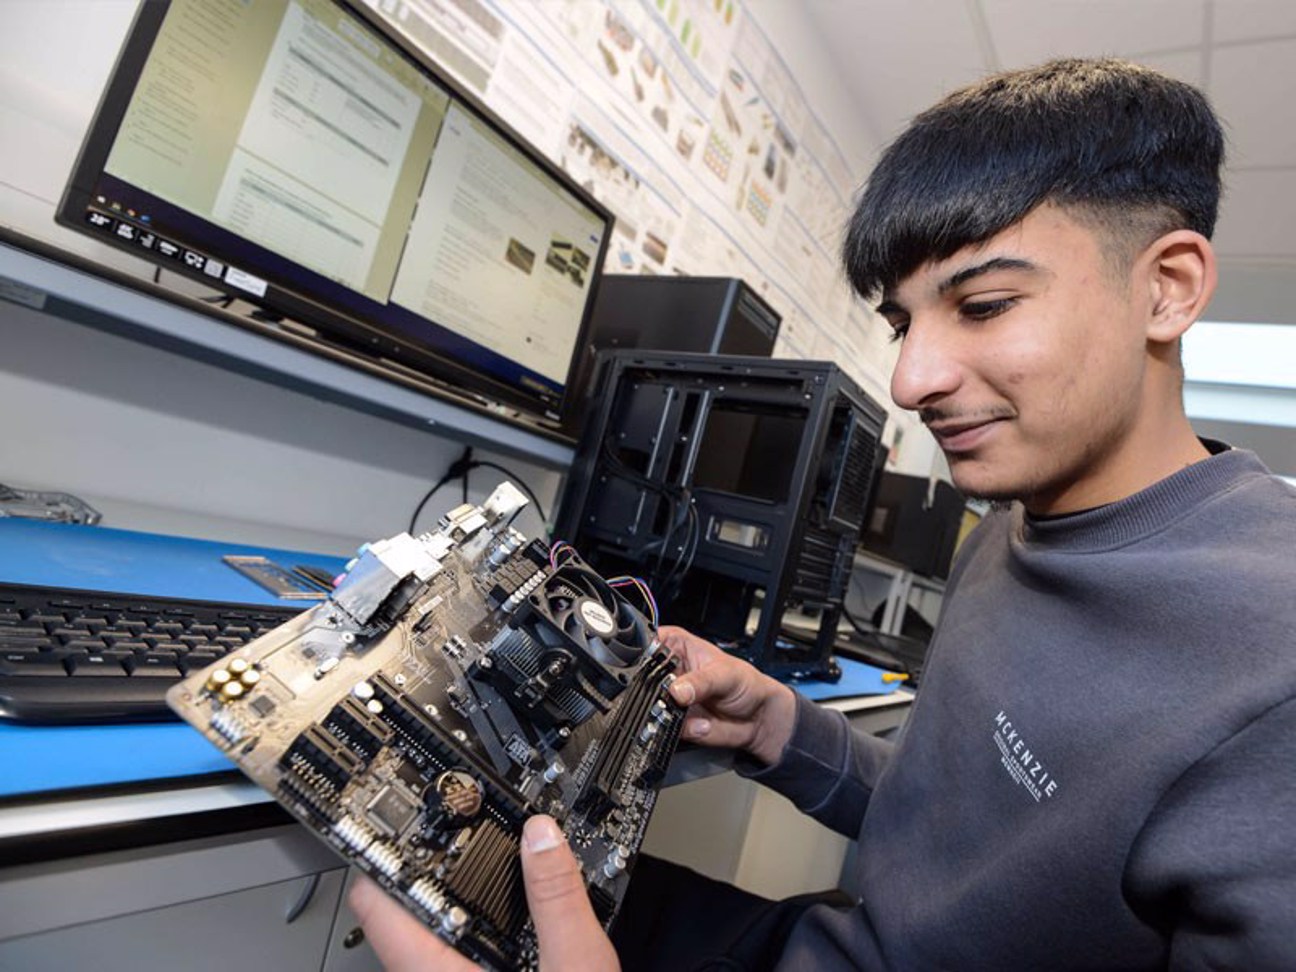 Student looking at a motherboard